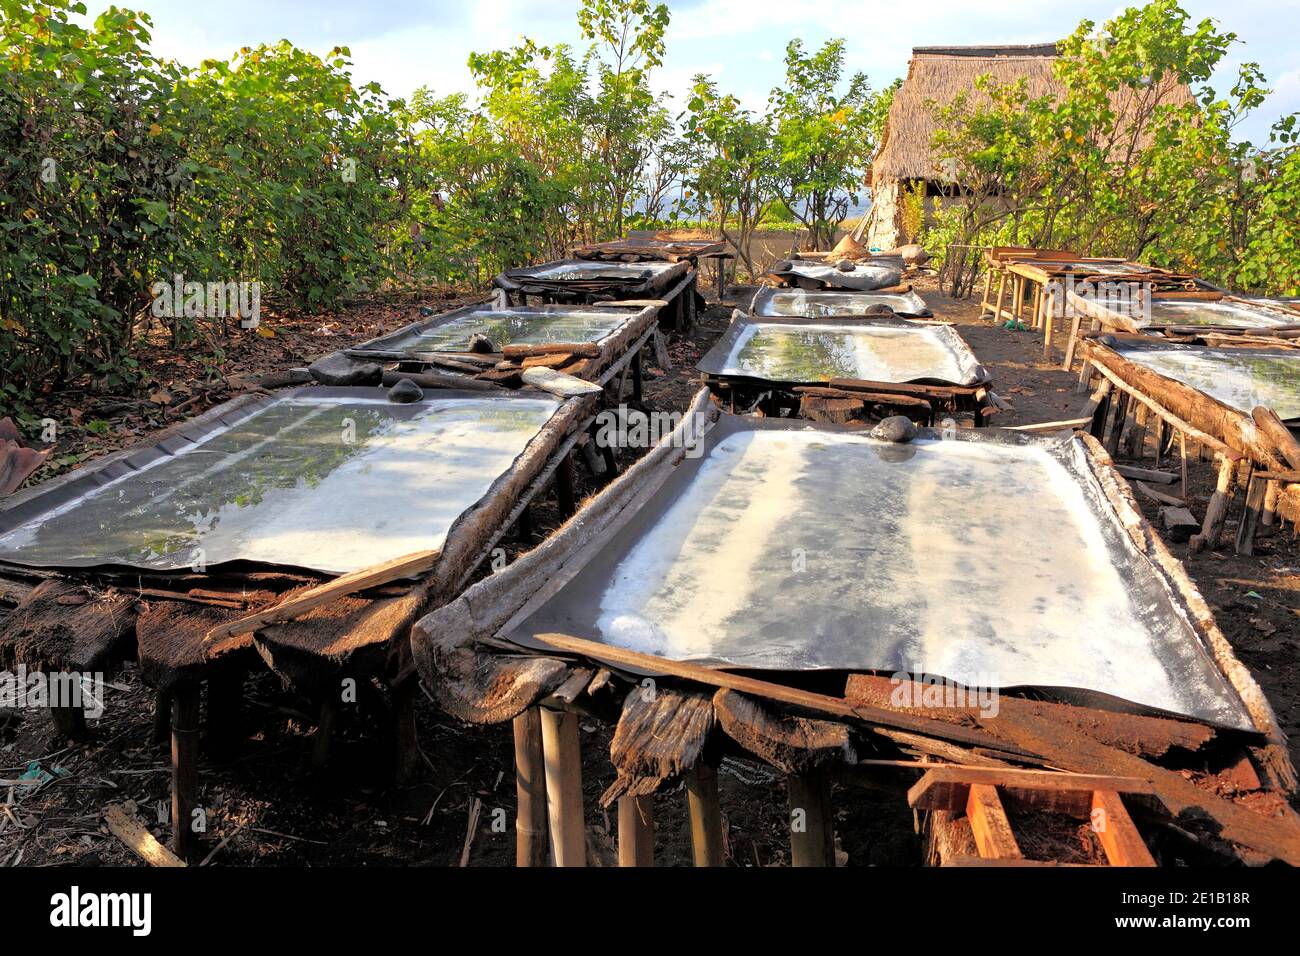 Salt water left to dry in the sunshine during traditional salt making. Kusmba, Bali, Indonesia Stock Photo